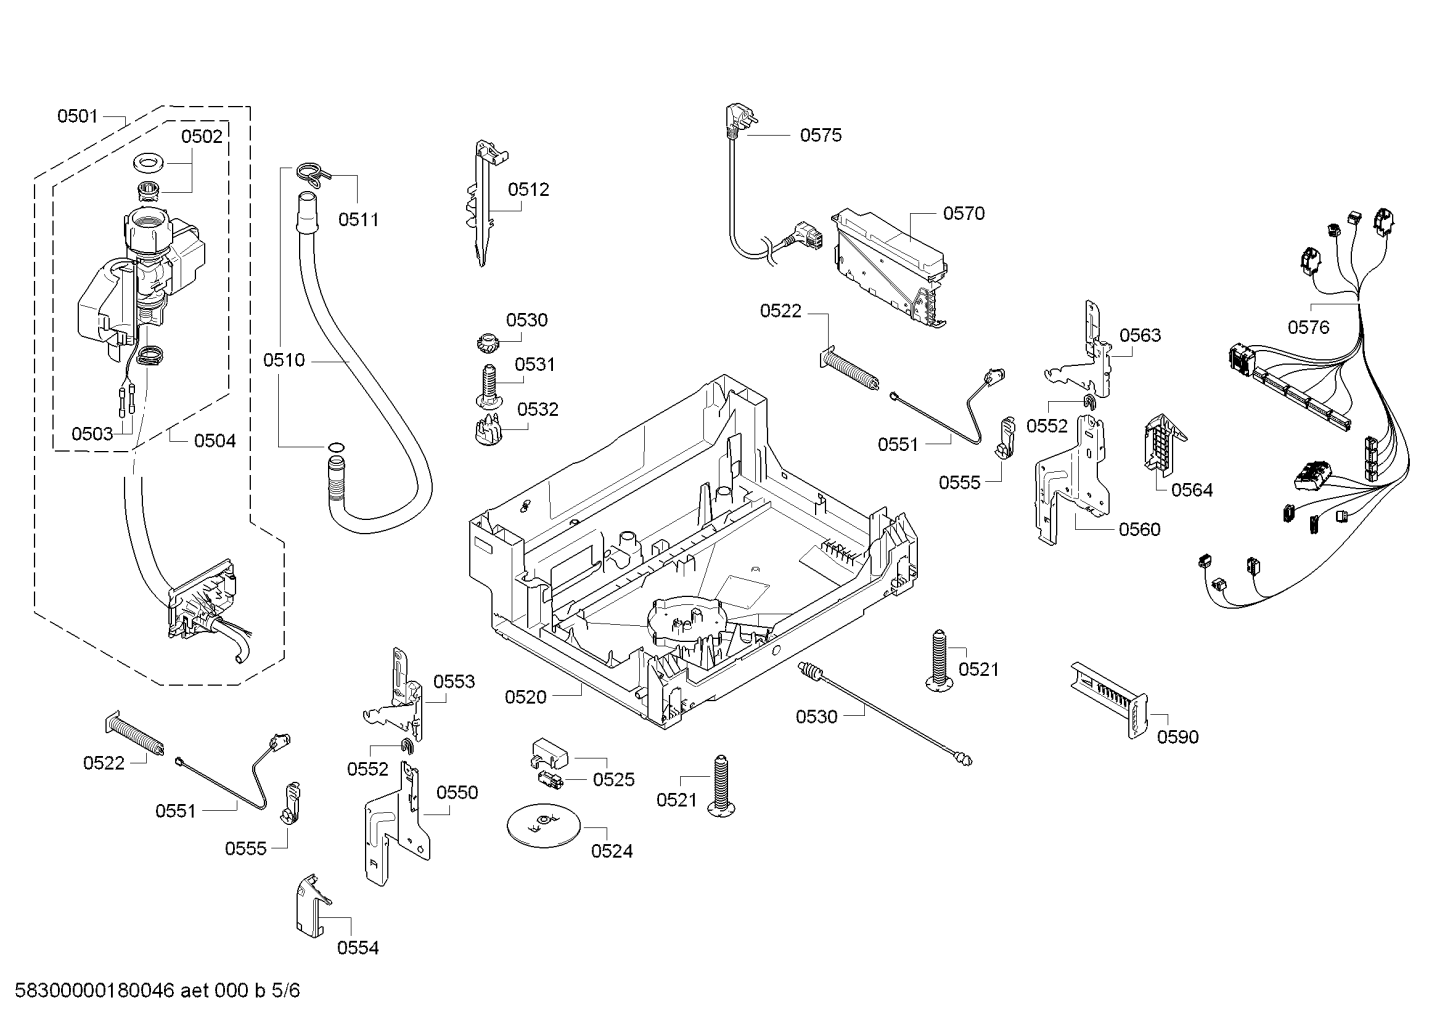 drawing_link_5_device_1749276